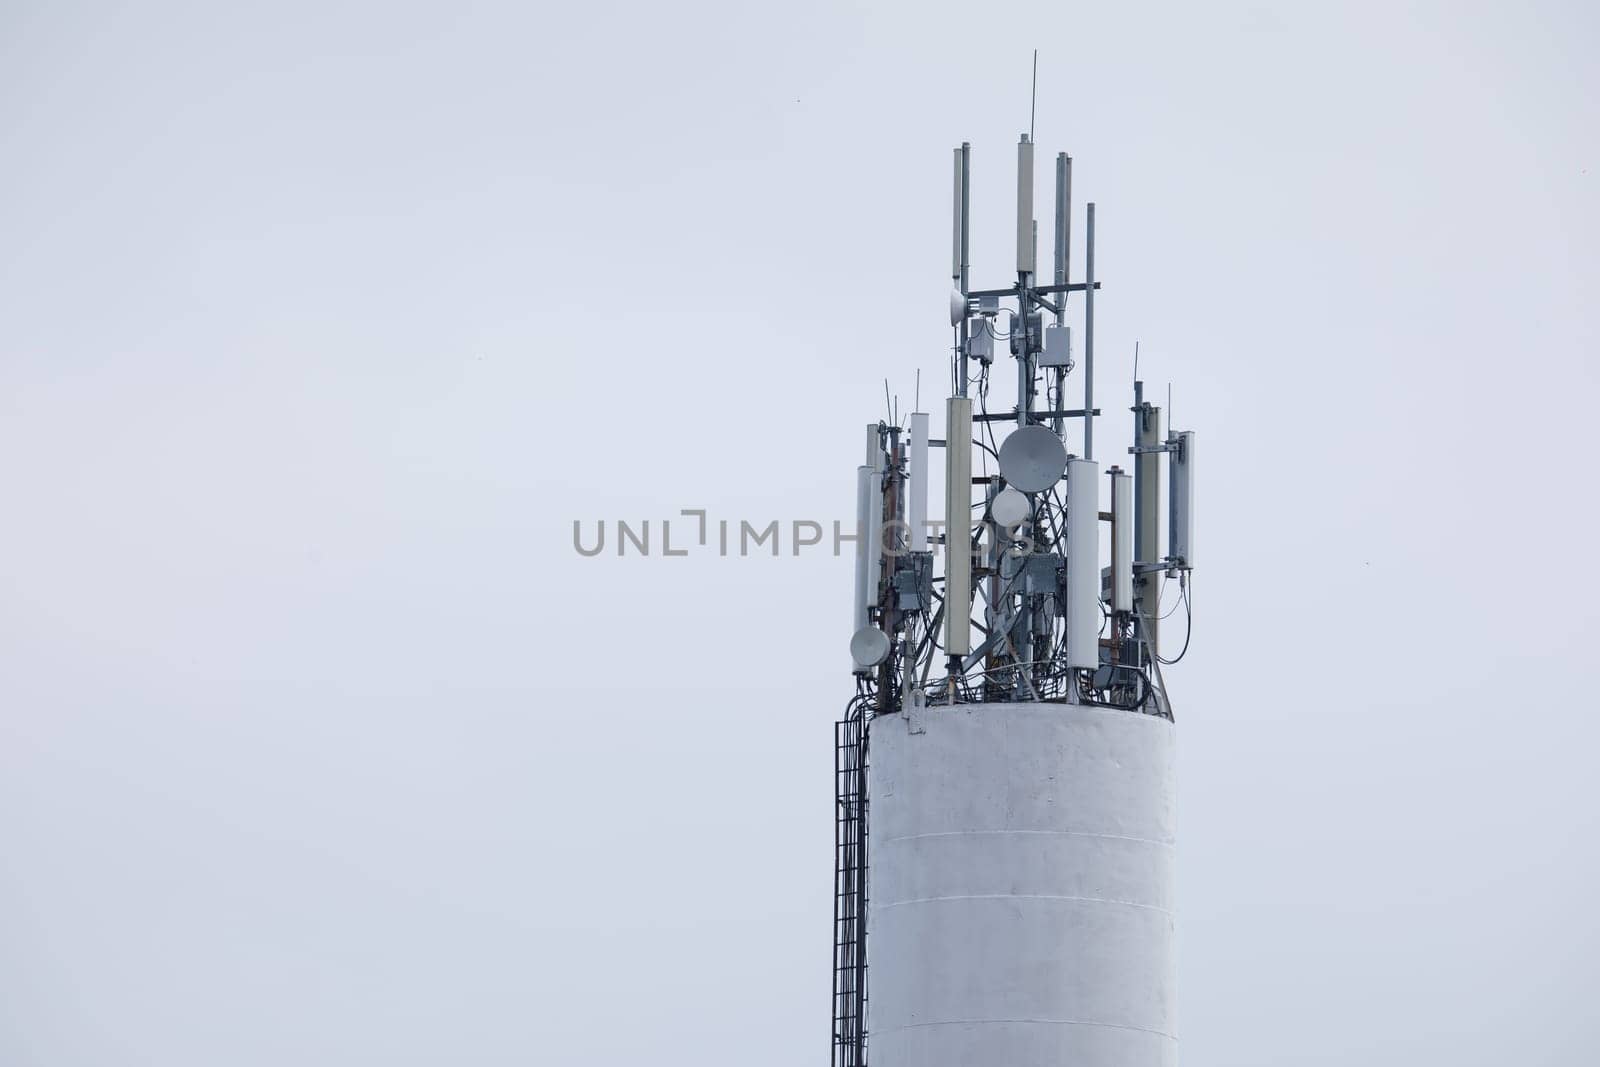 tower of mobile operators 4G, communication station. High quality photo